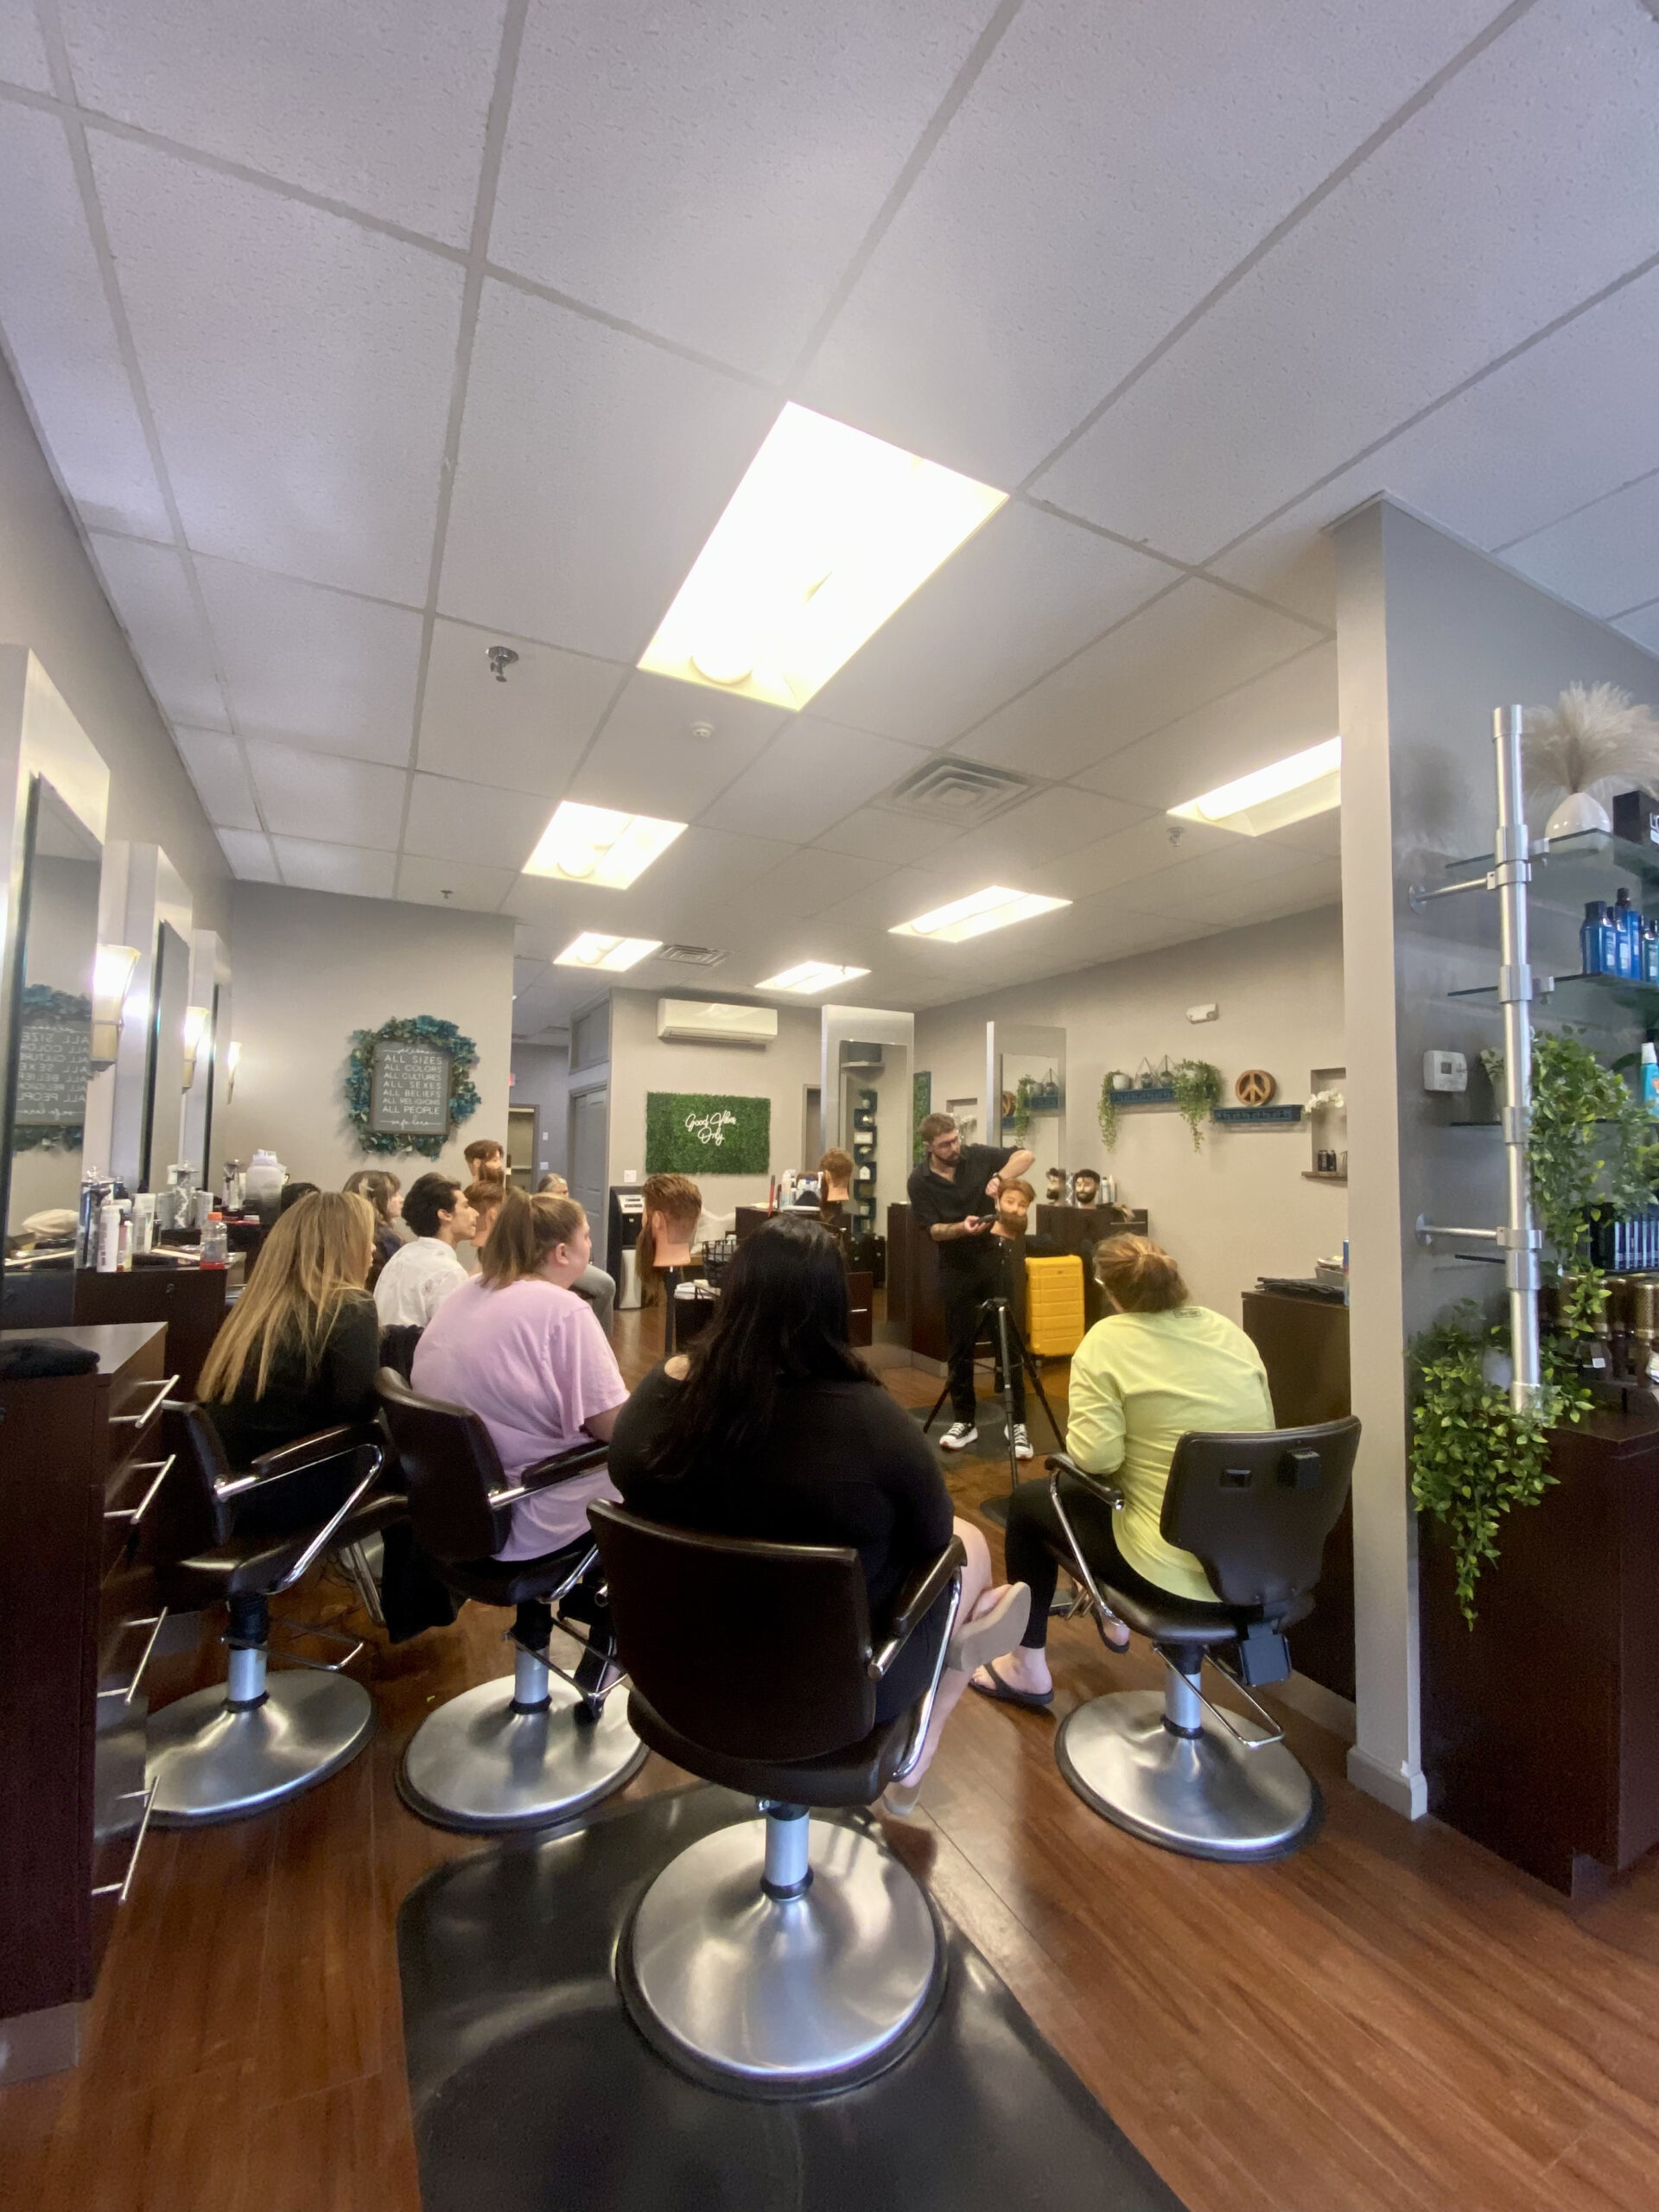 Women's Haircut Near Me: Thiells, NY, Appointments